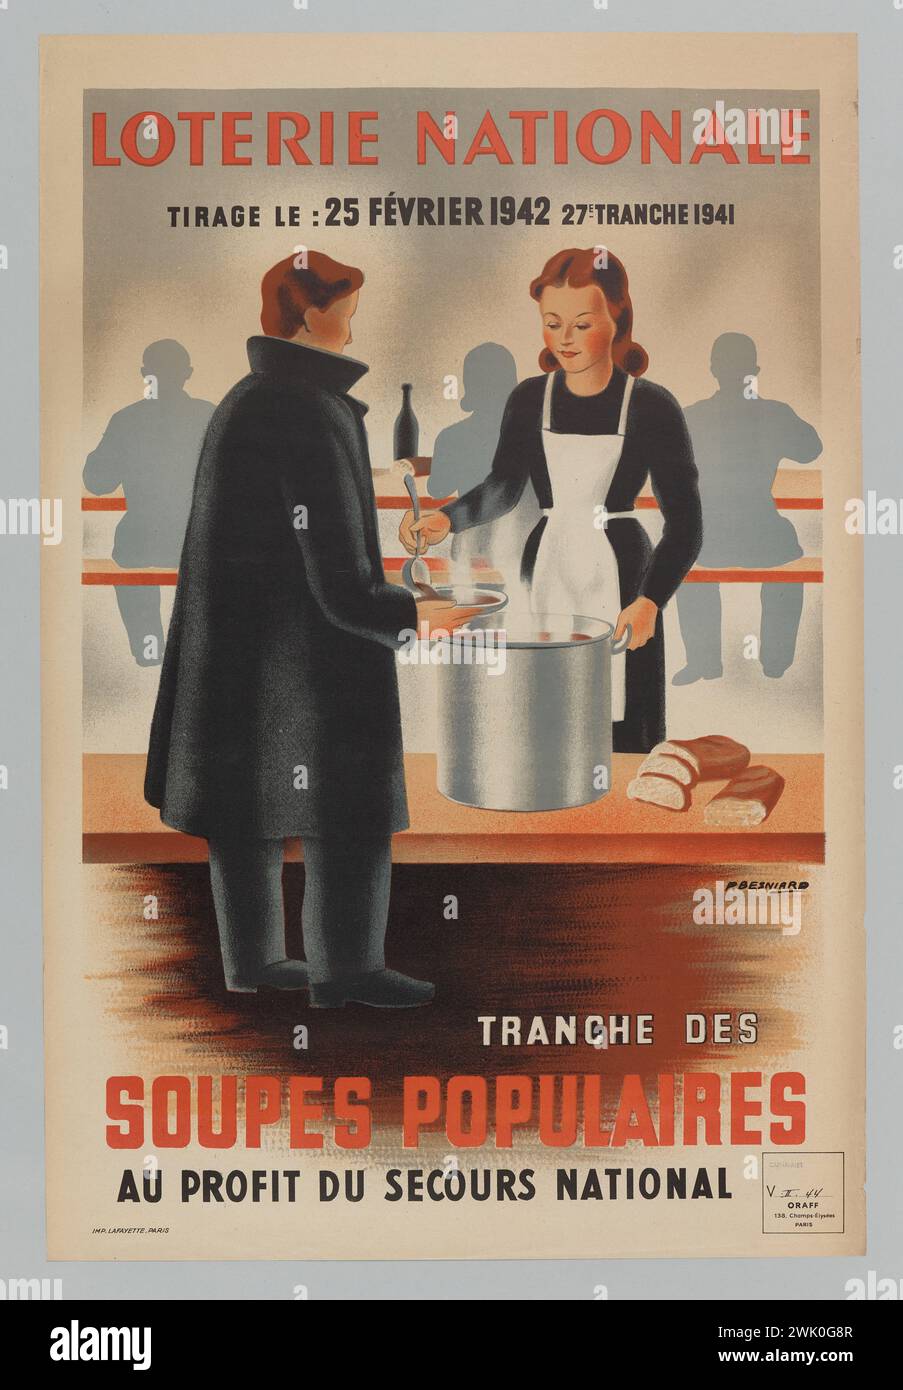 Besniard, P. (N.1890-11-14-D.1977), National Lottery/ Draw on: February 25, 1942 27th tranche 1941/ Popular soups/ for the benefit of the National Secours (Registered title (Letter), 1941. Color lithography. Carnavalet museum, history of Paris. Stock Photo